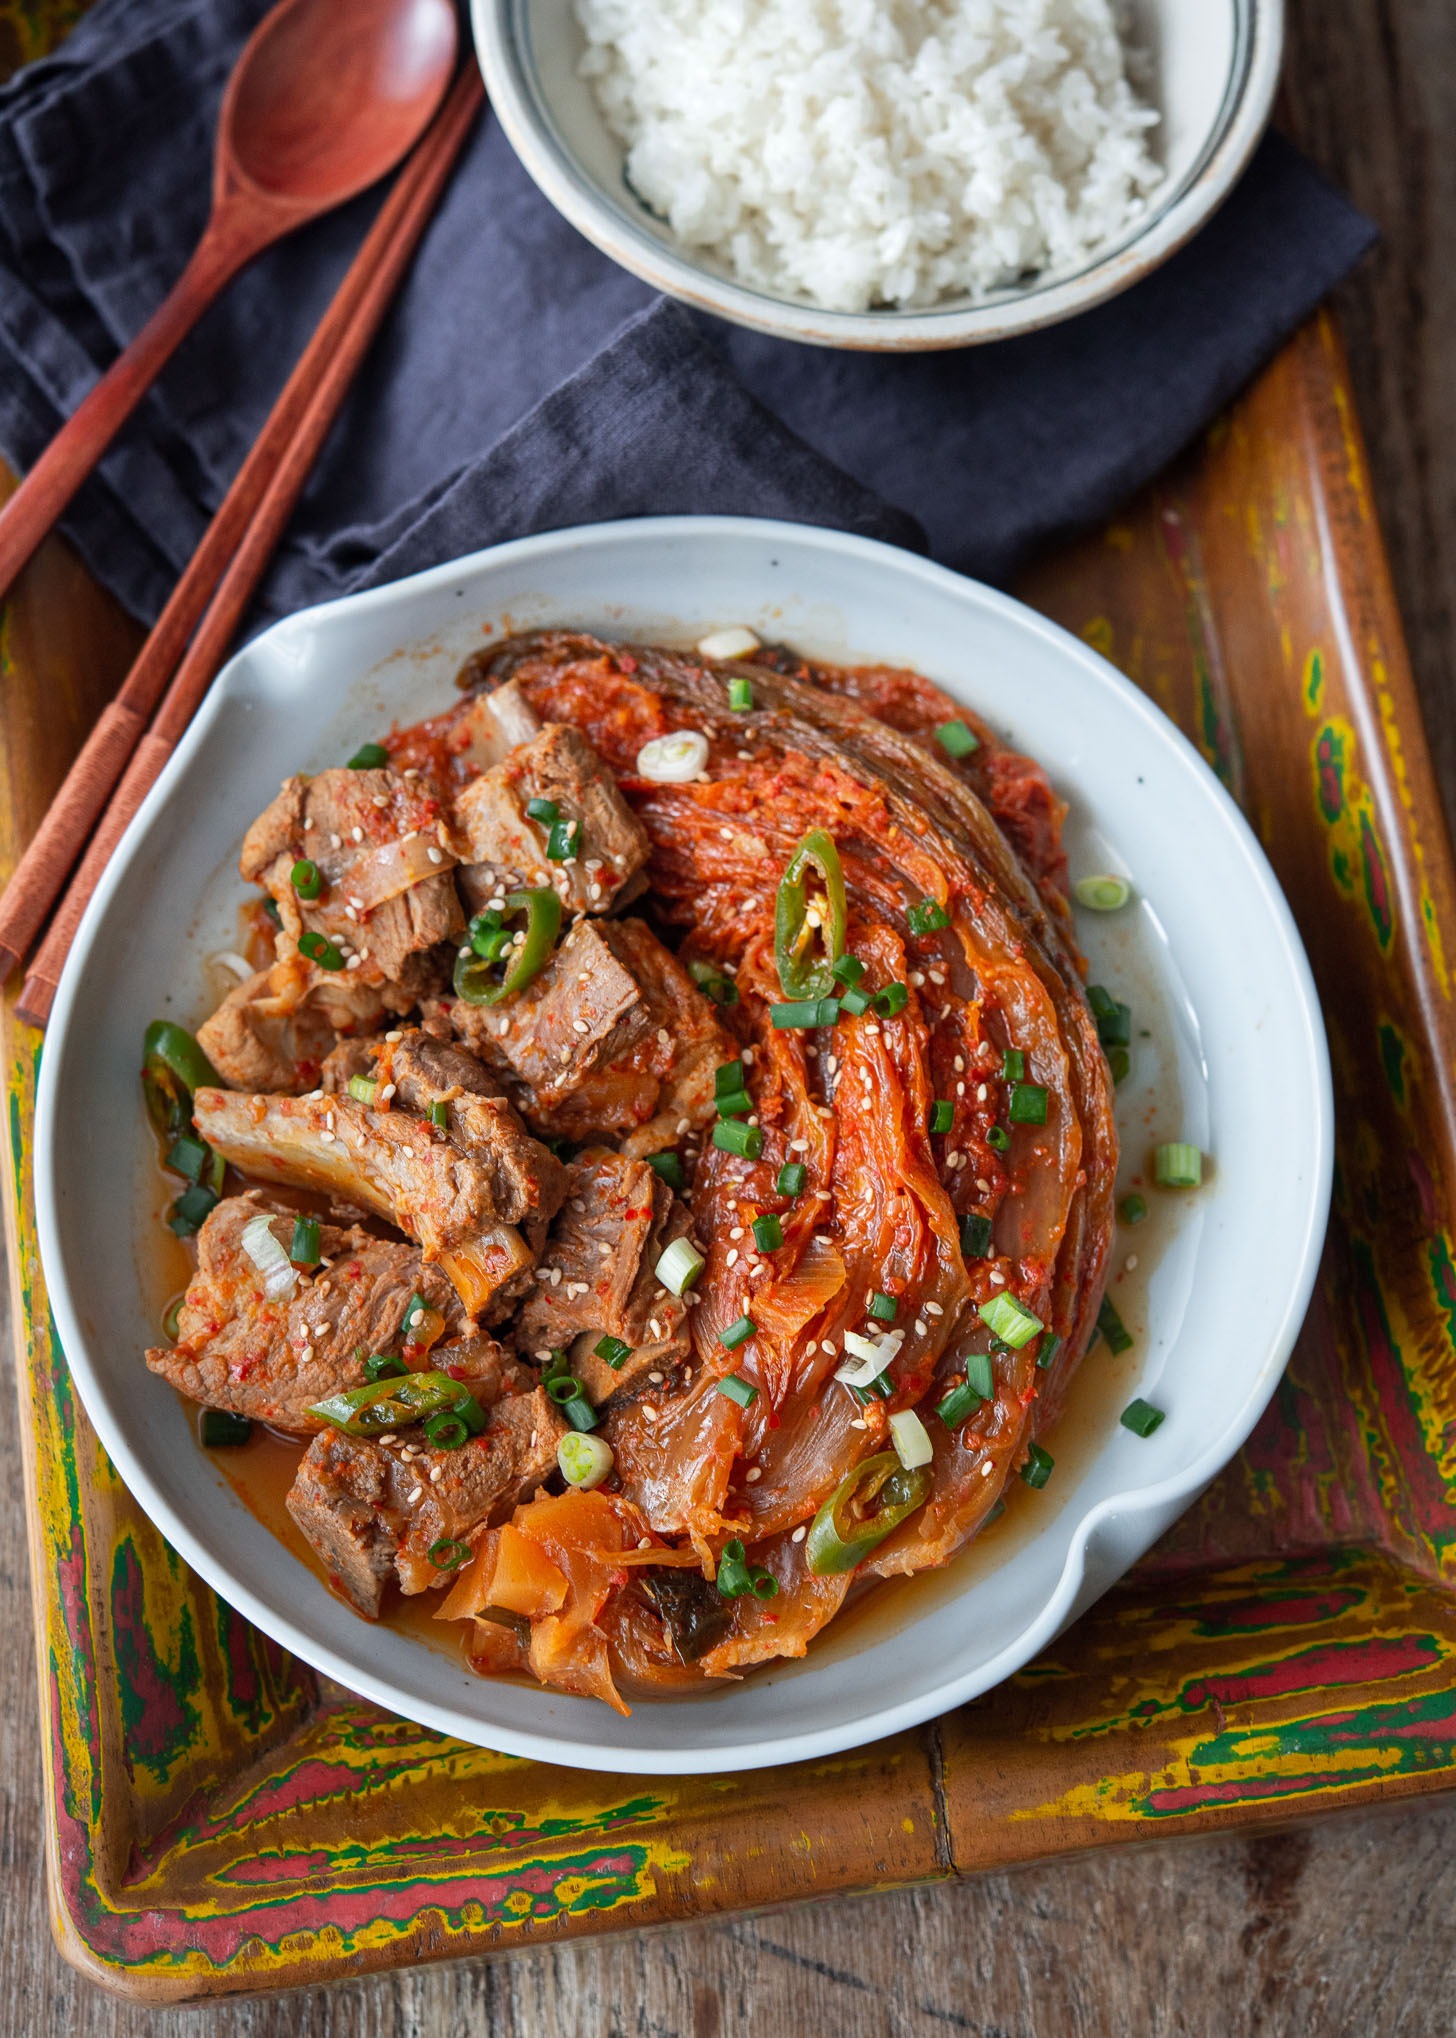 A plate of kimchi jjim with pork ribs served with rice.